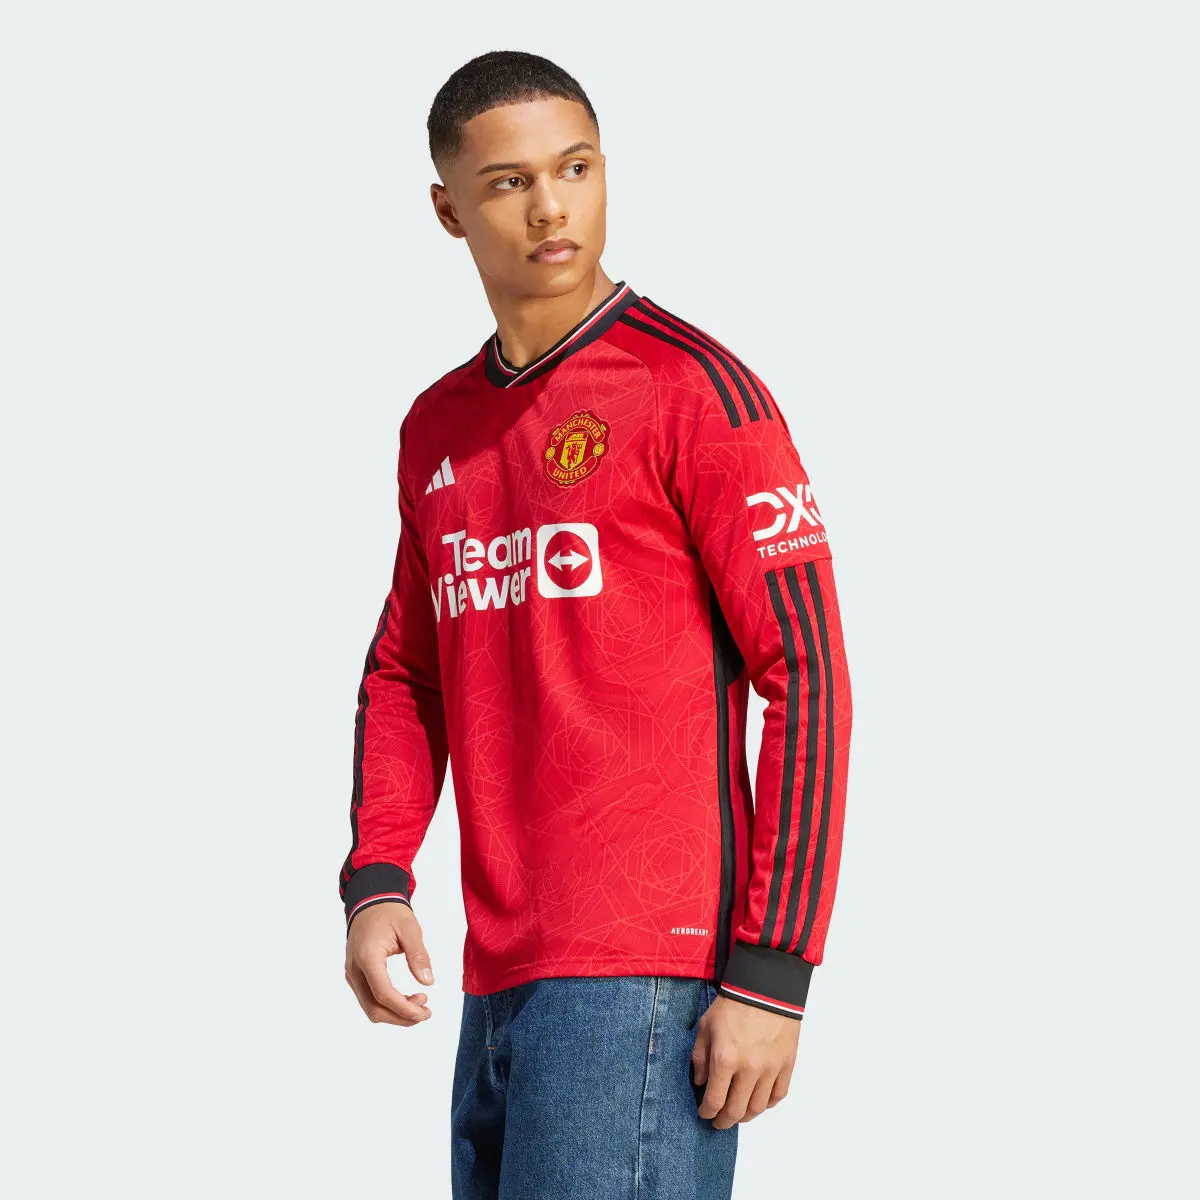 Adidas Maglia Home 23/24 Long Sleeve Manchester United FC. 2